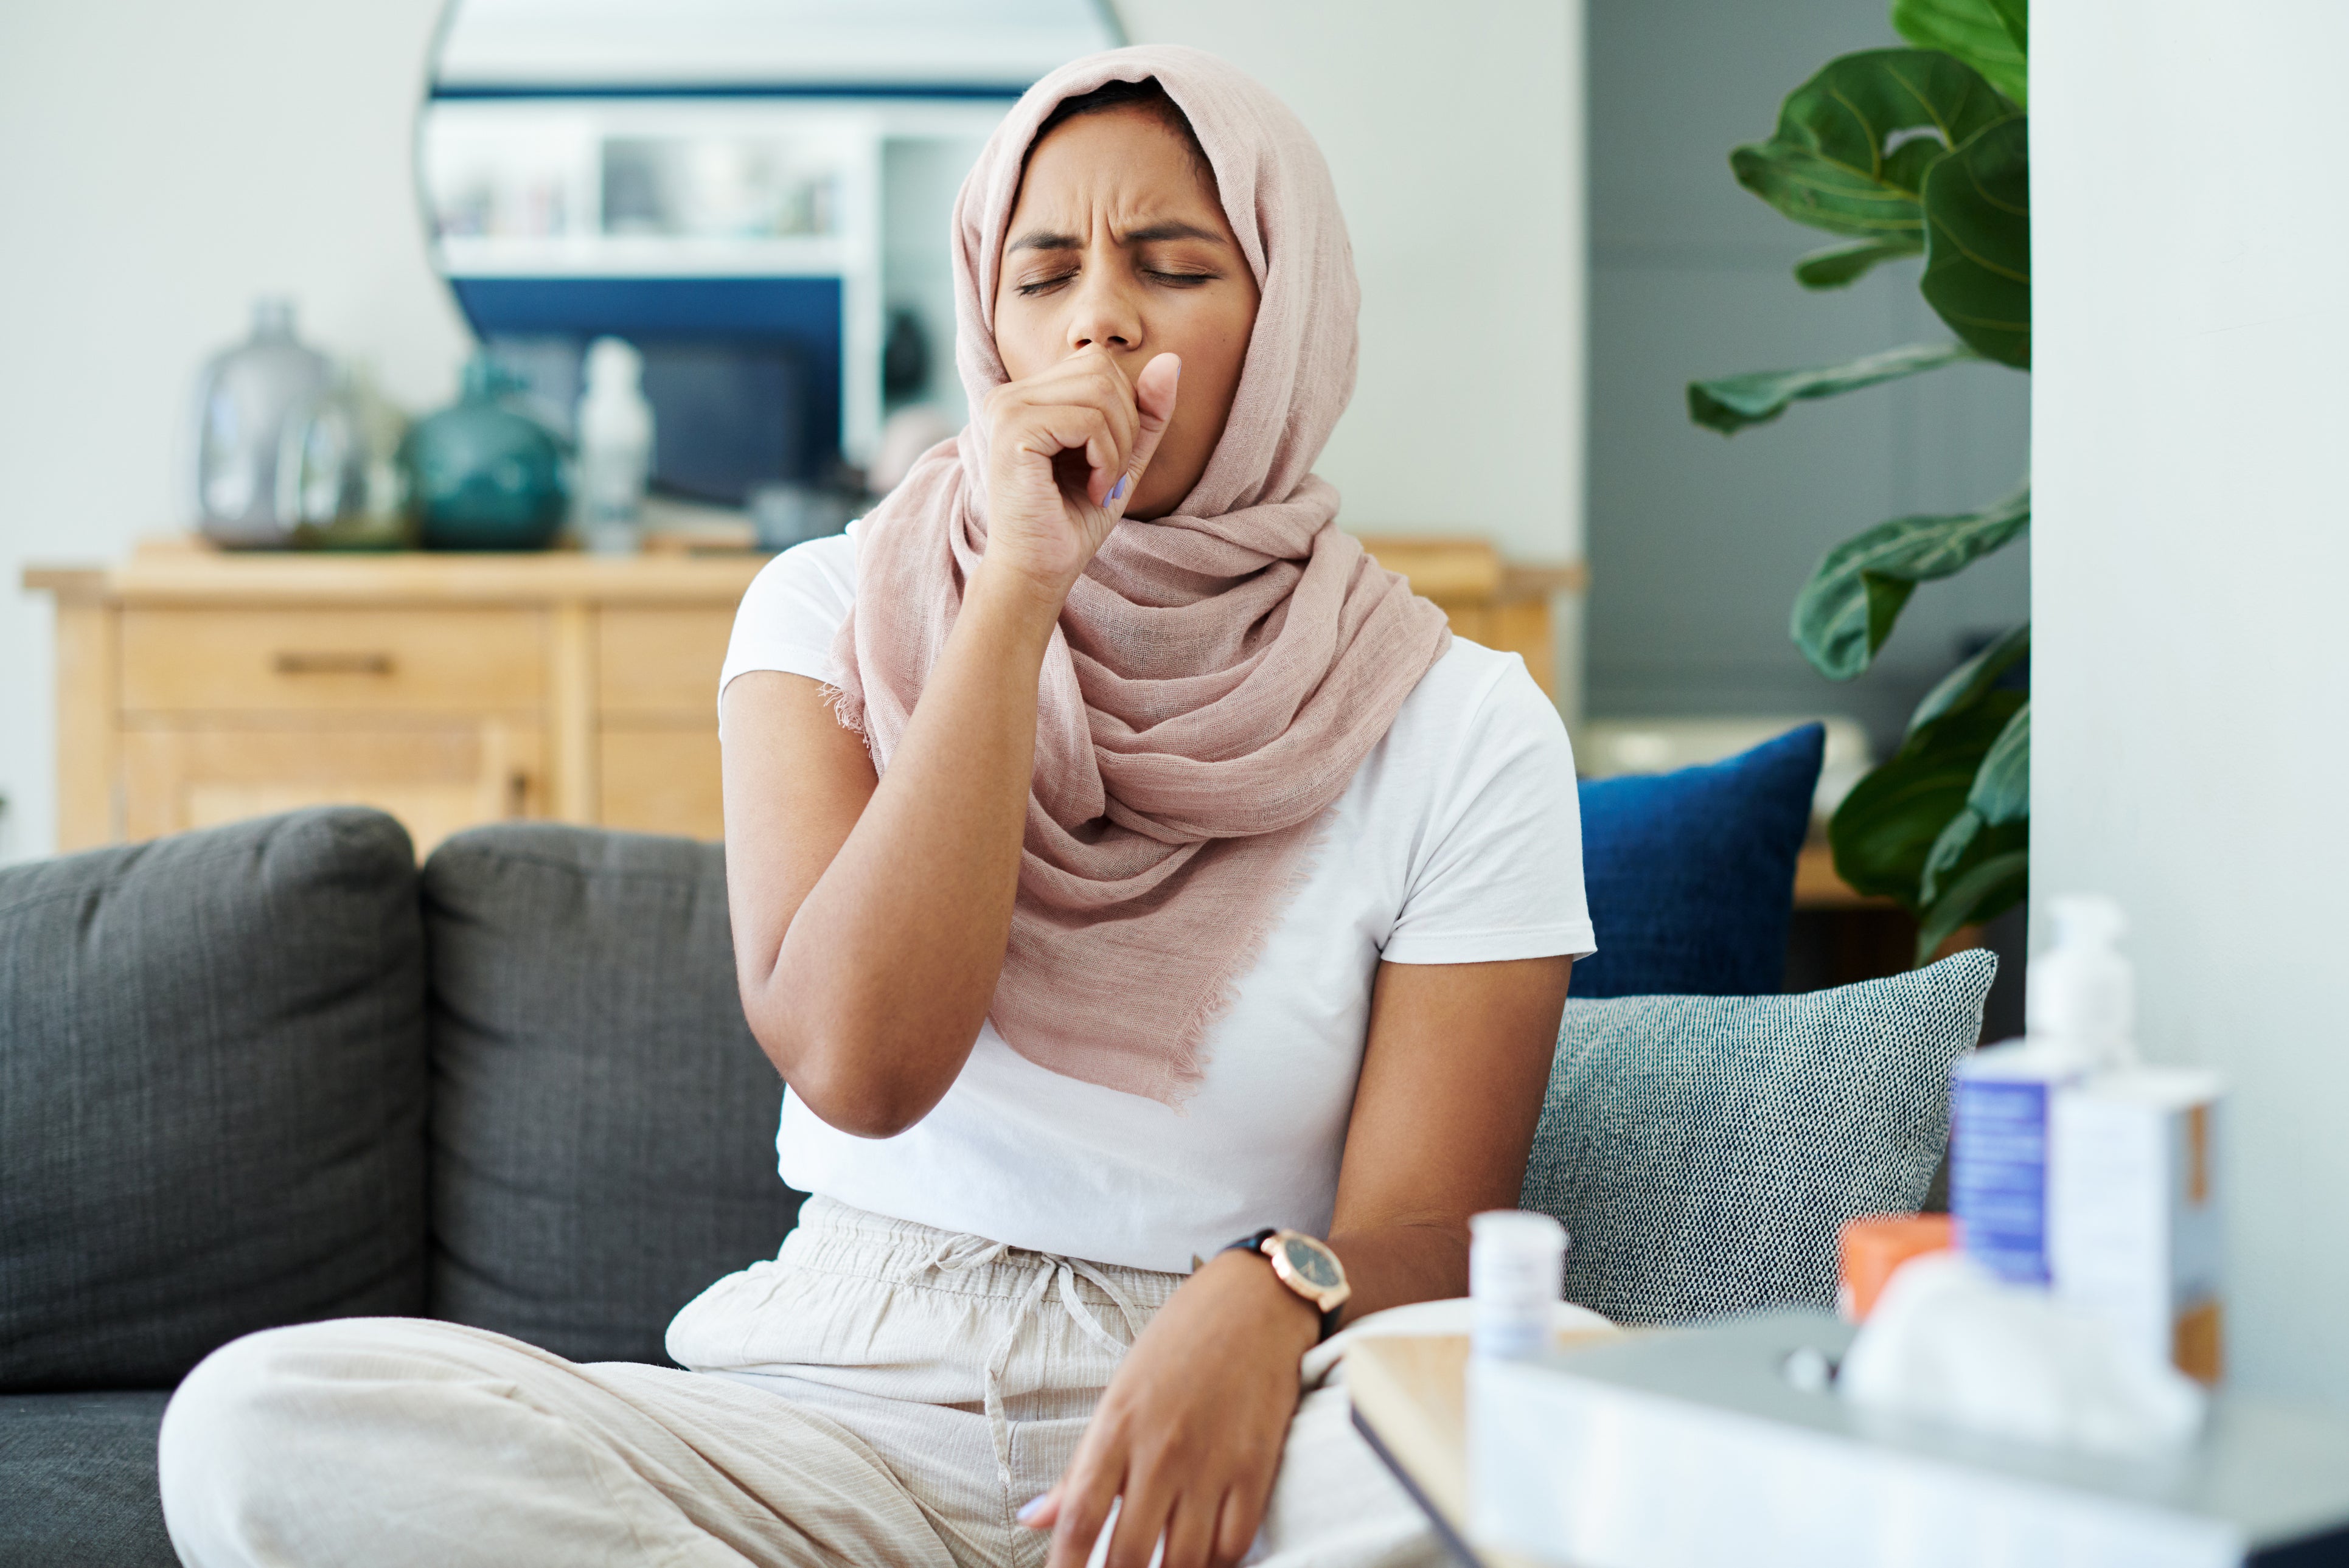 The impact of a chronic cough can have a significant impact on an individual’s wellbeing